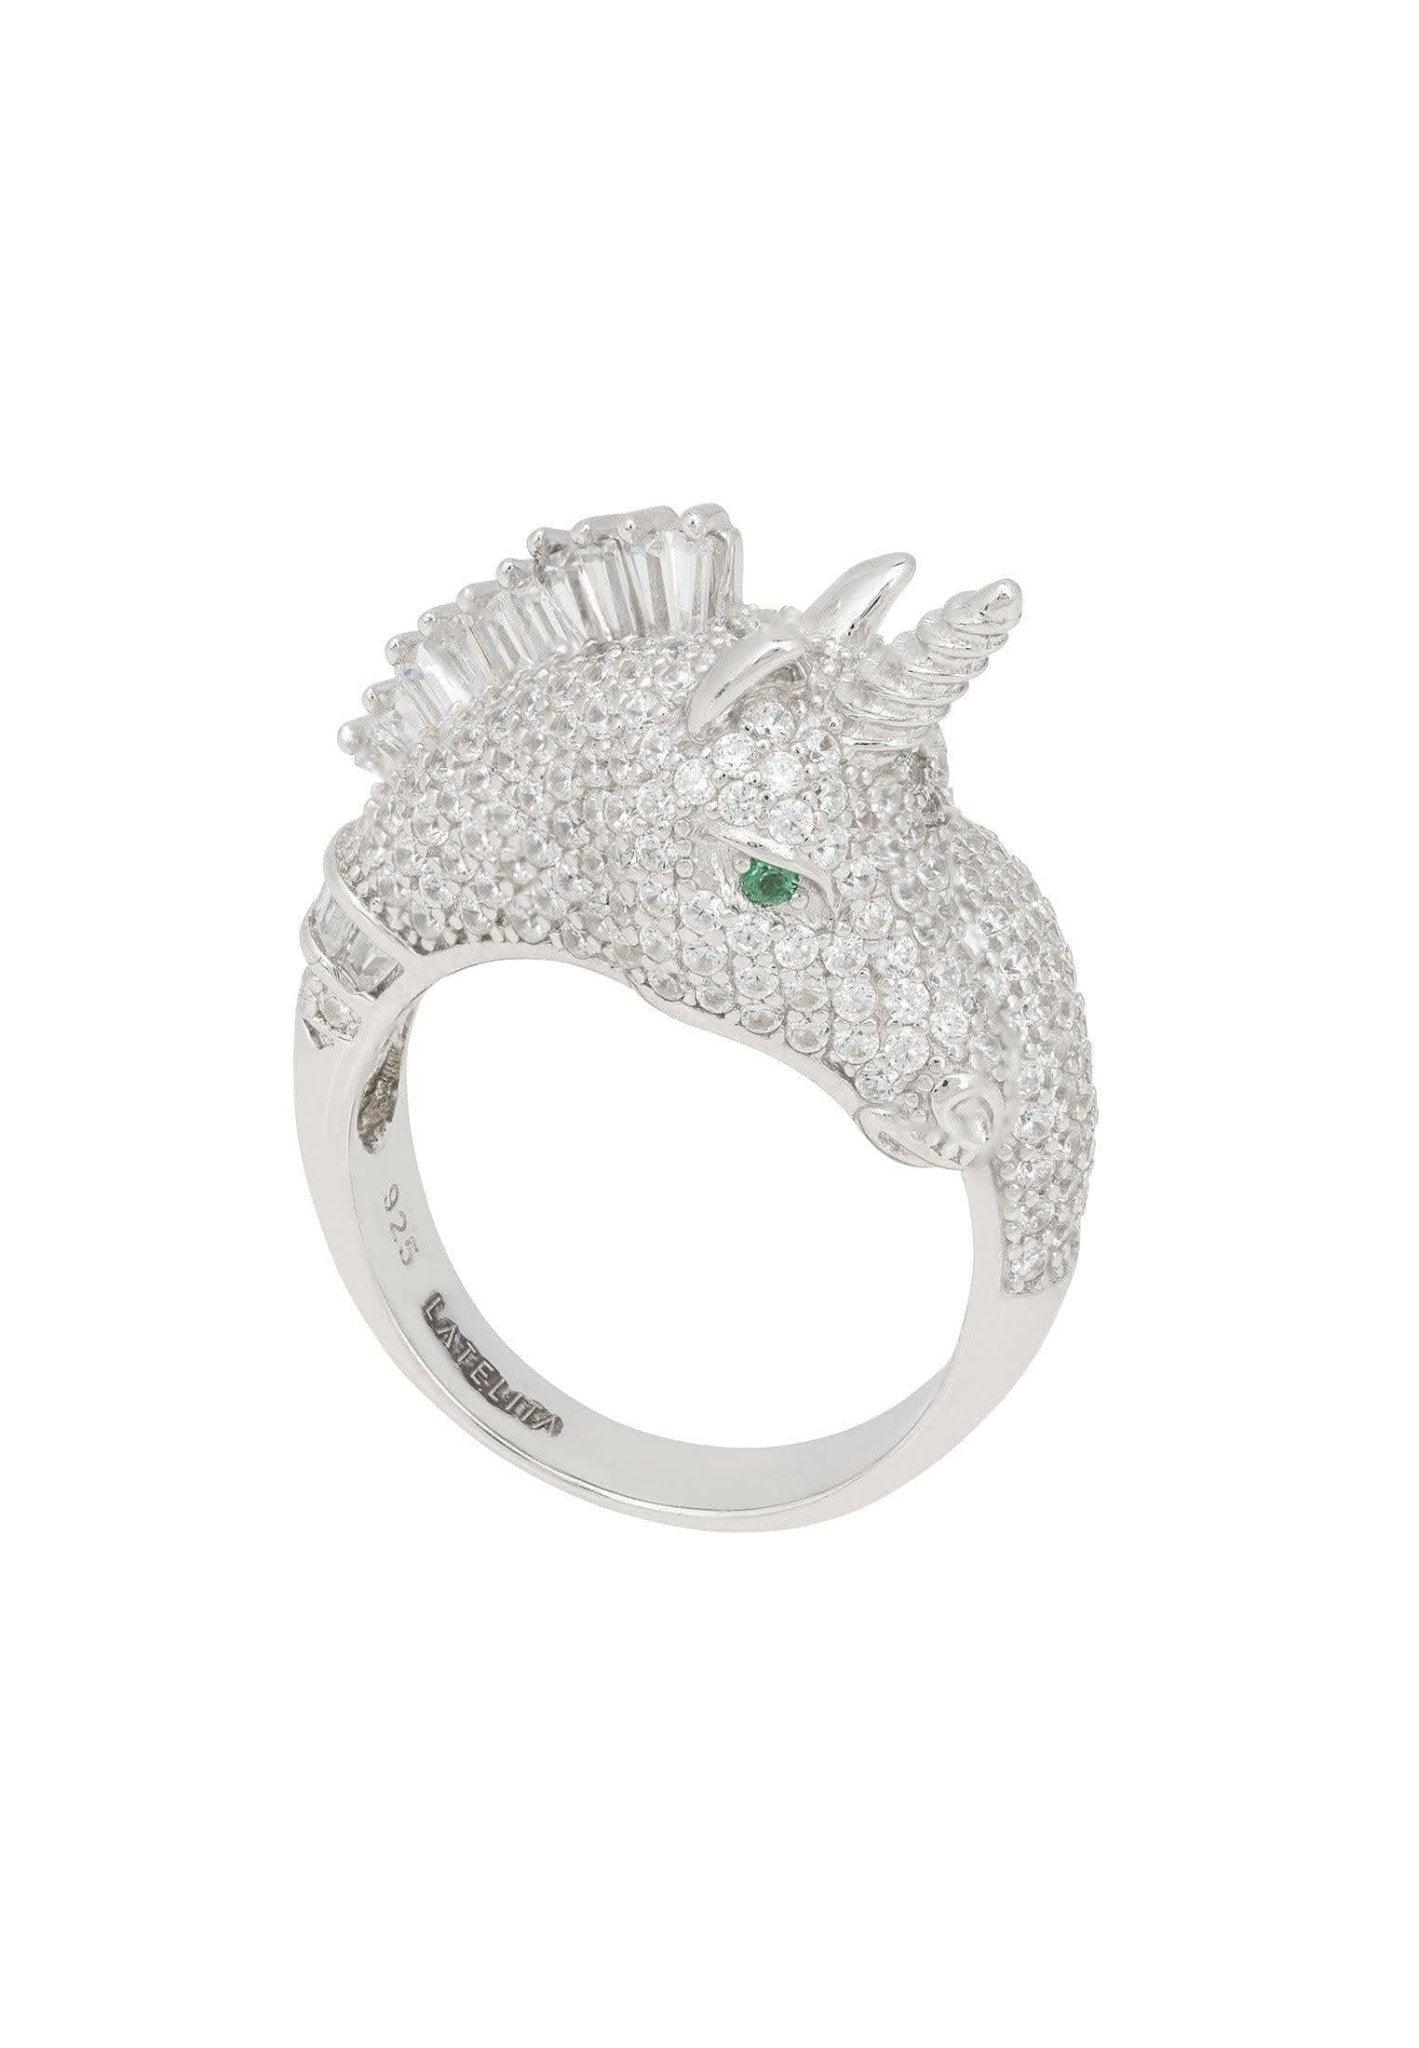 Unicorn CZ Sparkling Ring Sterling Silver